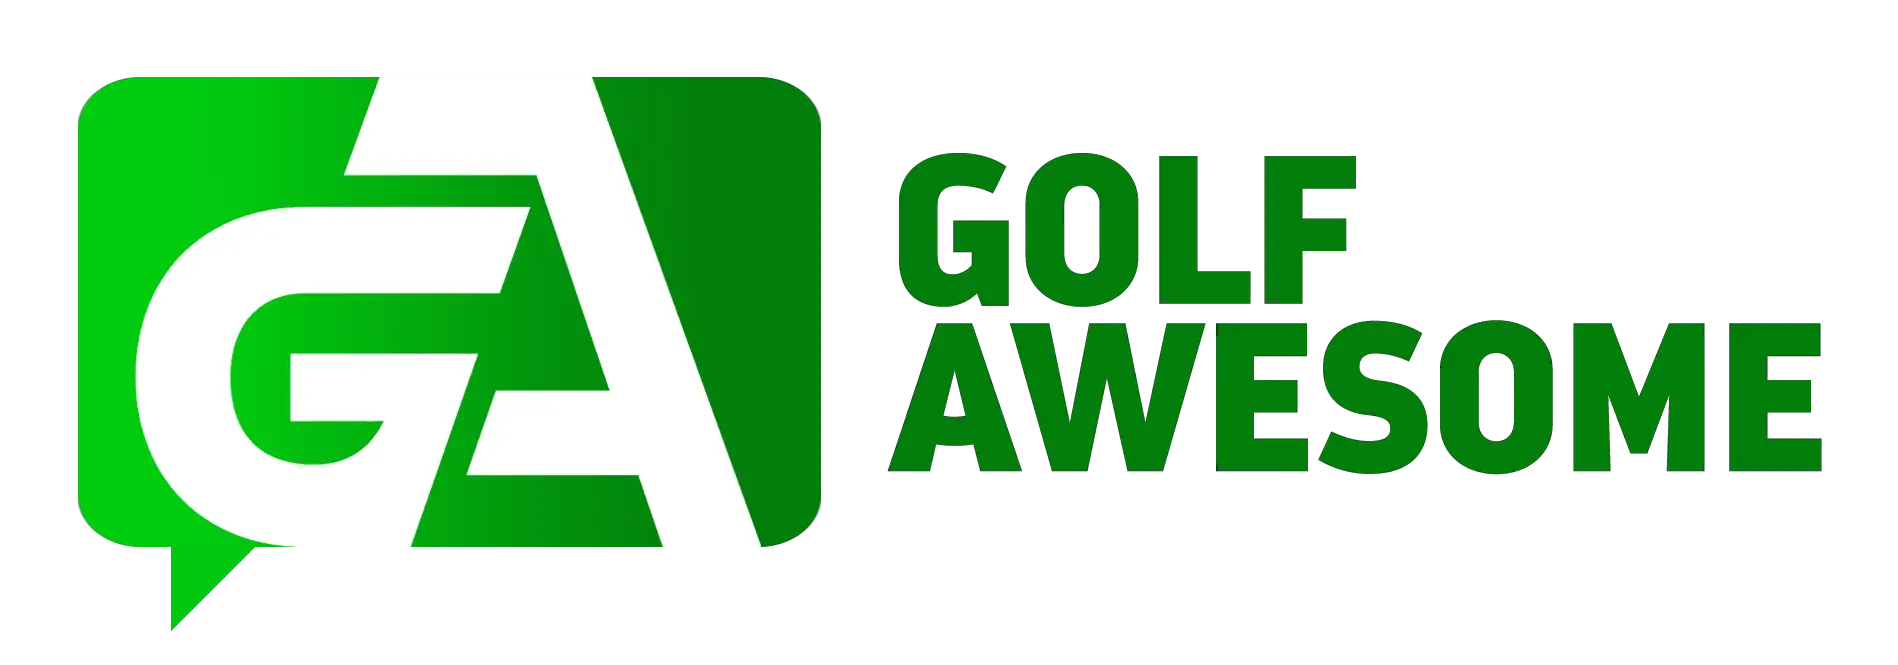 GolfAwesome official logo